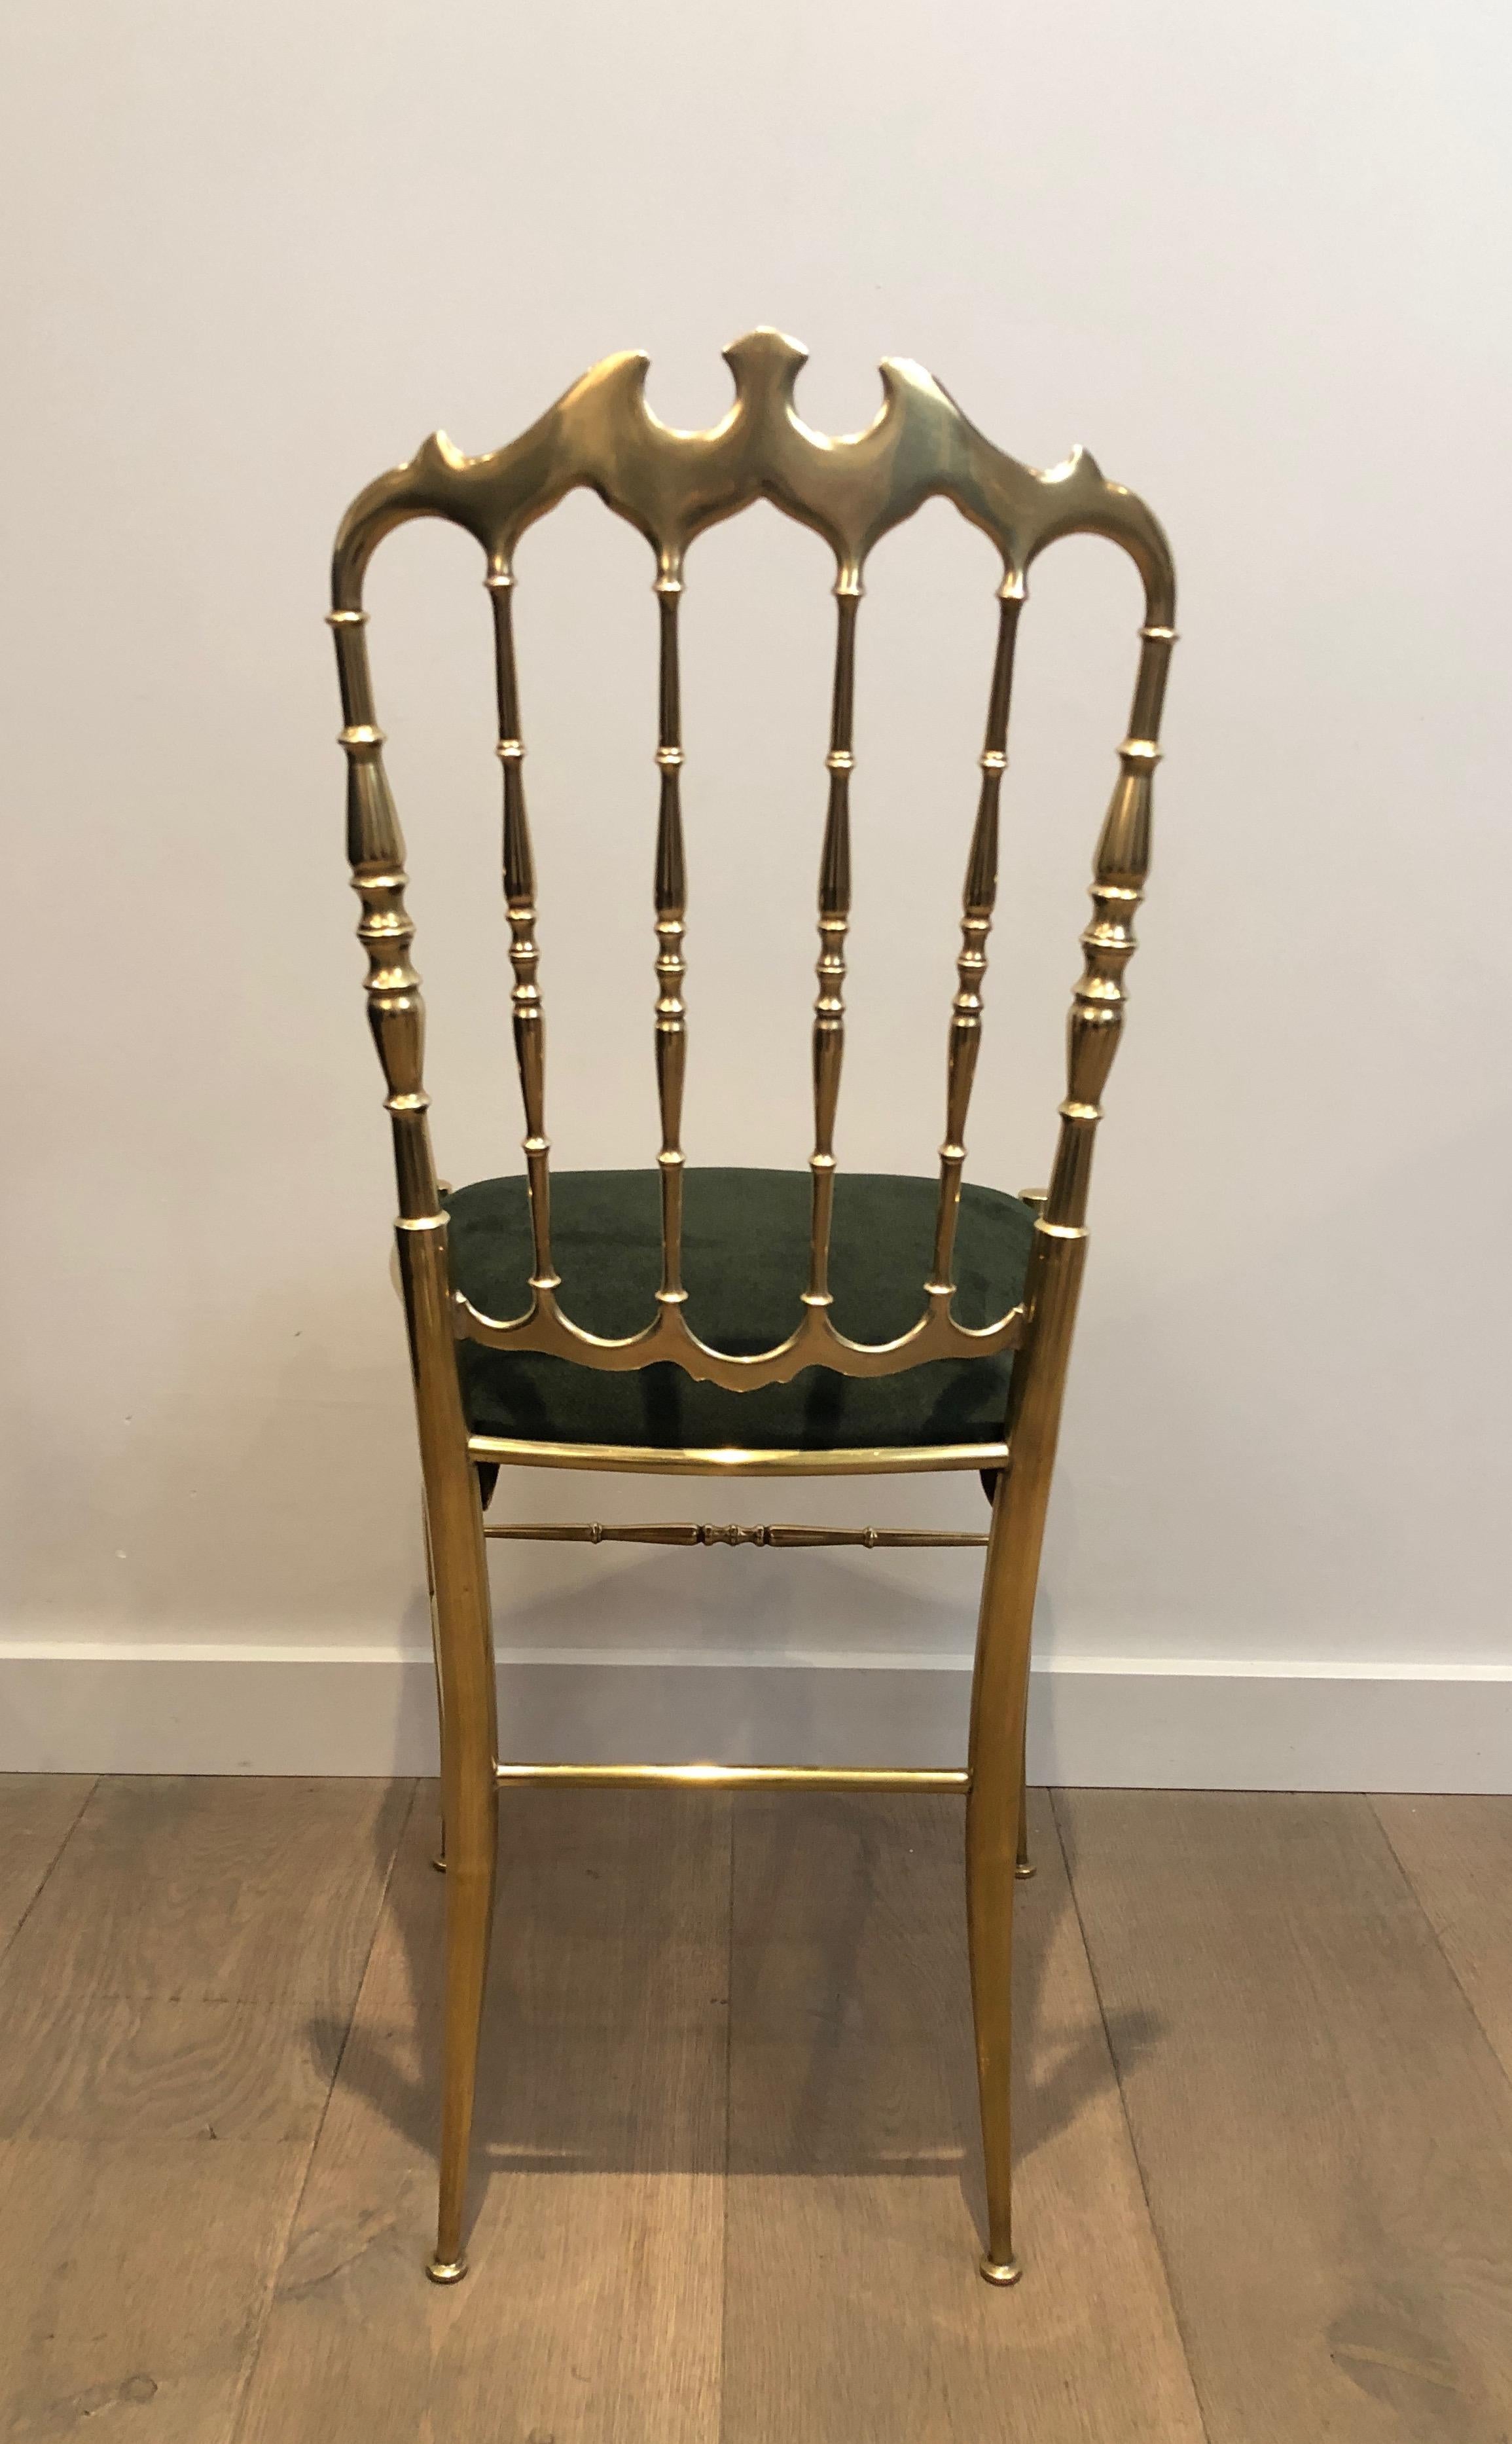 Rare Suite of 6 Beautifully Crafted Brass Chiavari Chairs, Seats Green Covered 14